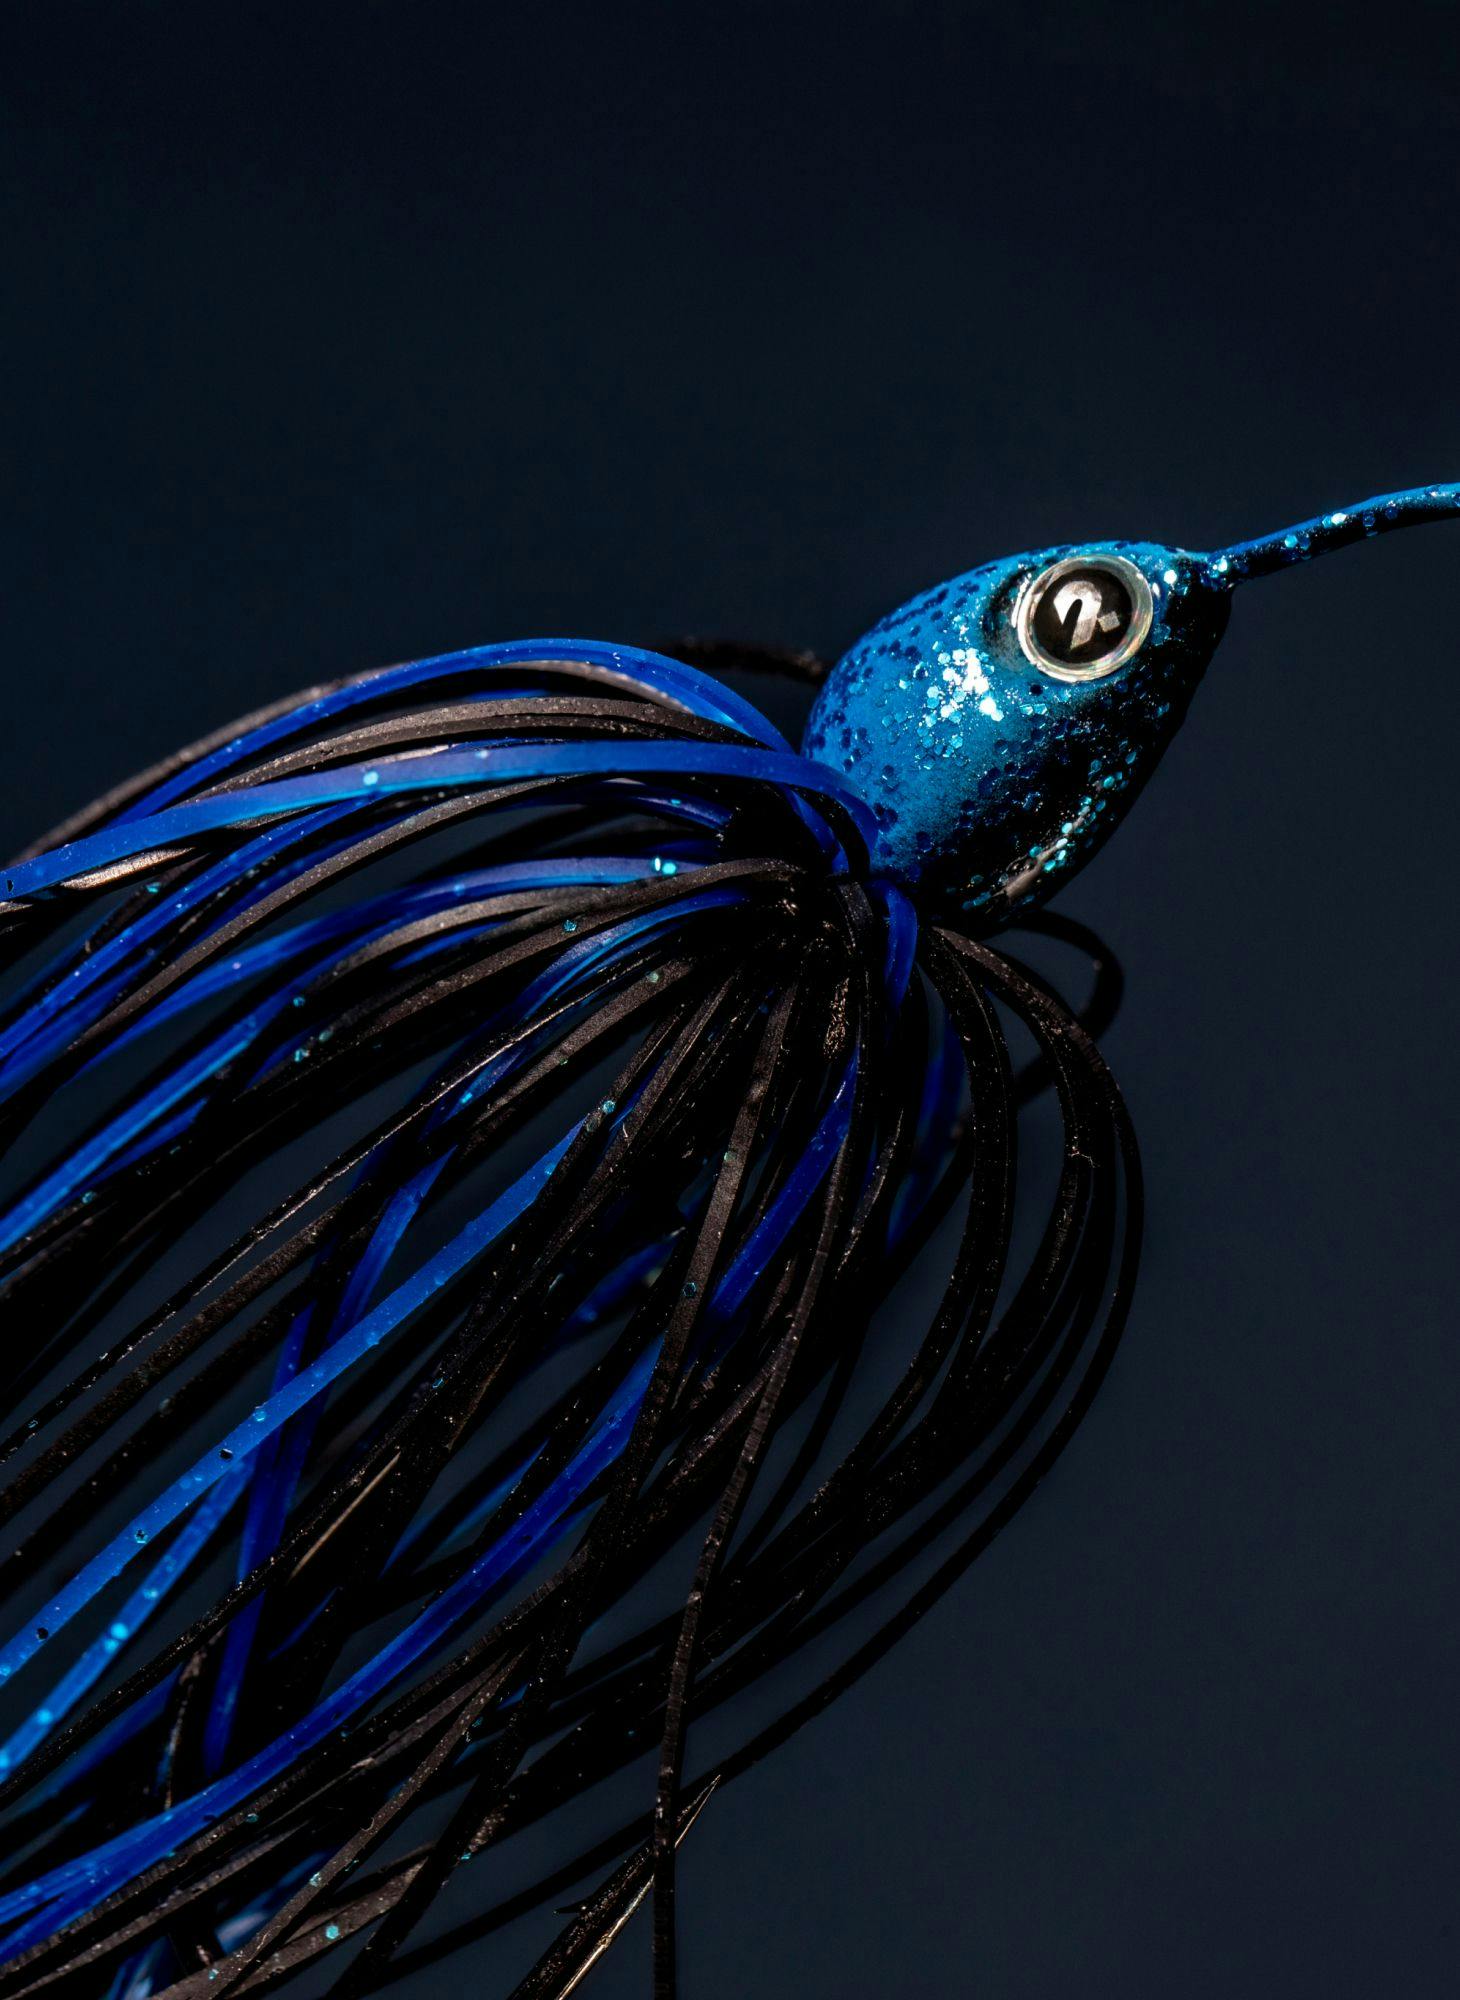 A blue and black fishing lure